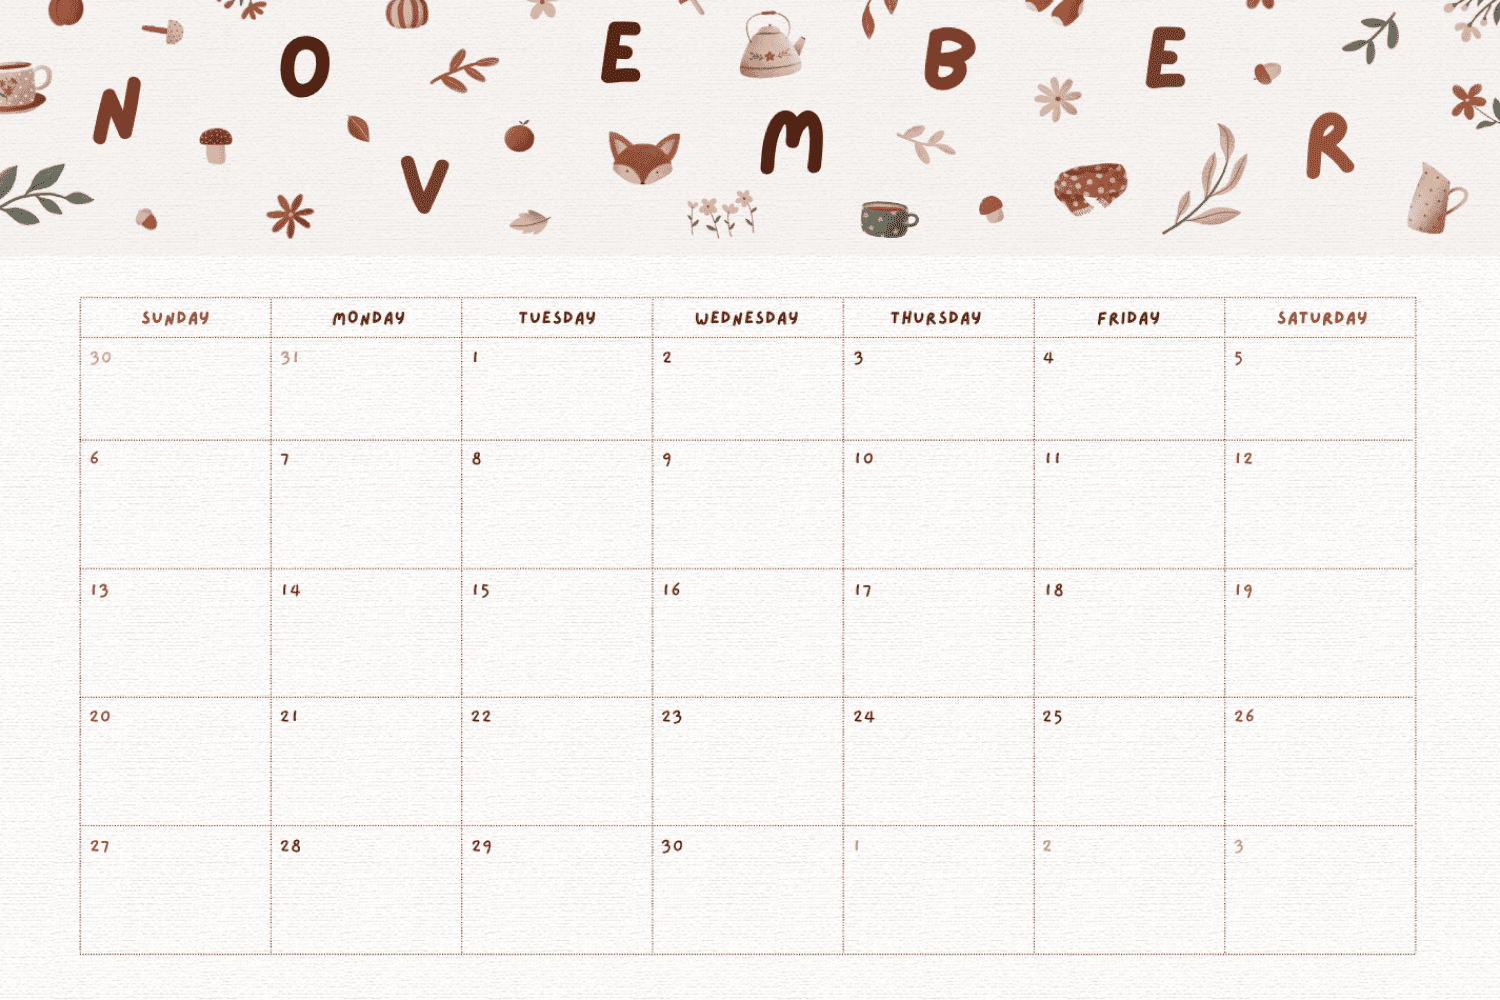 November calendar with drawn letters, fox, teapot, mushrooms and leaves.